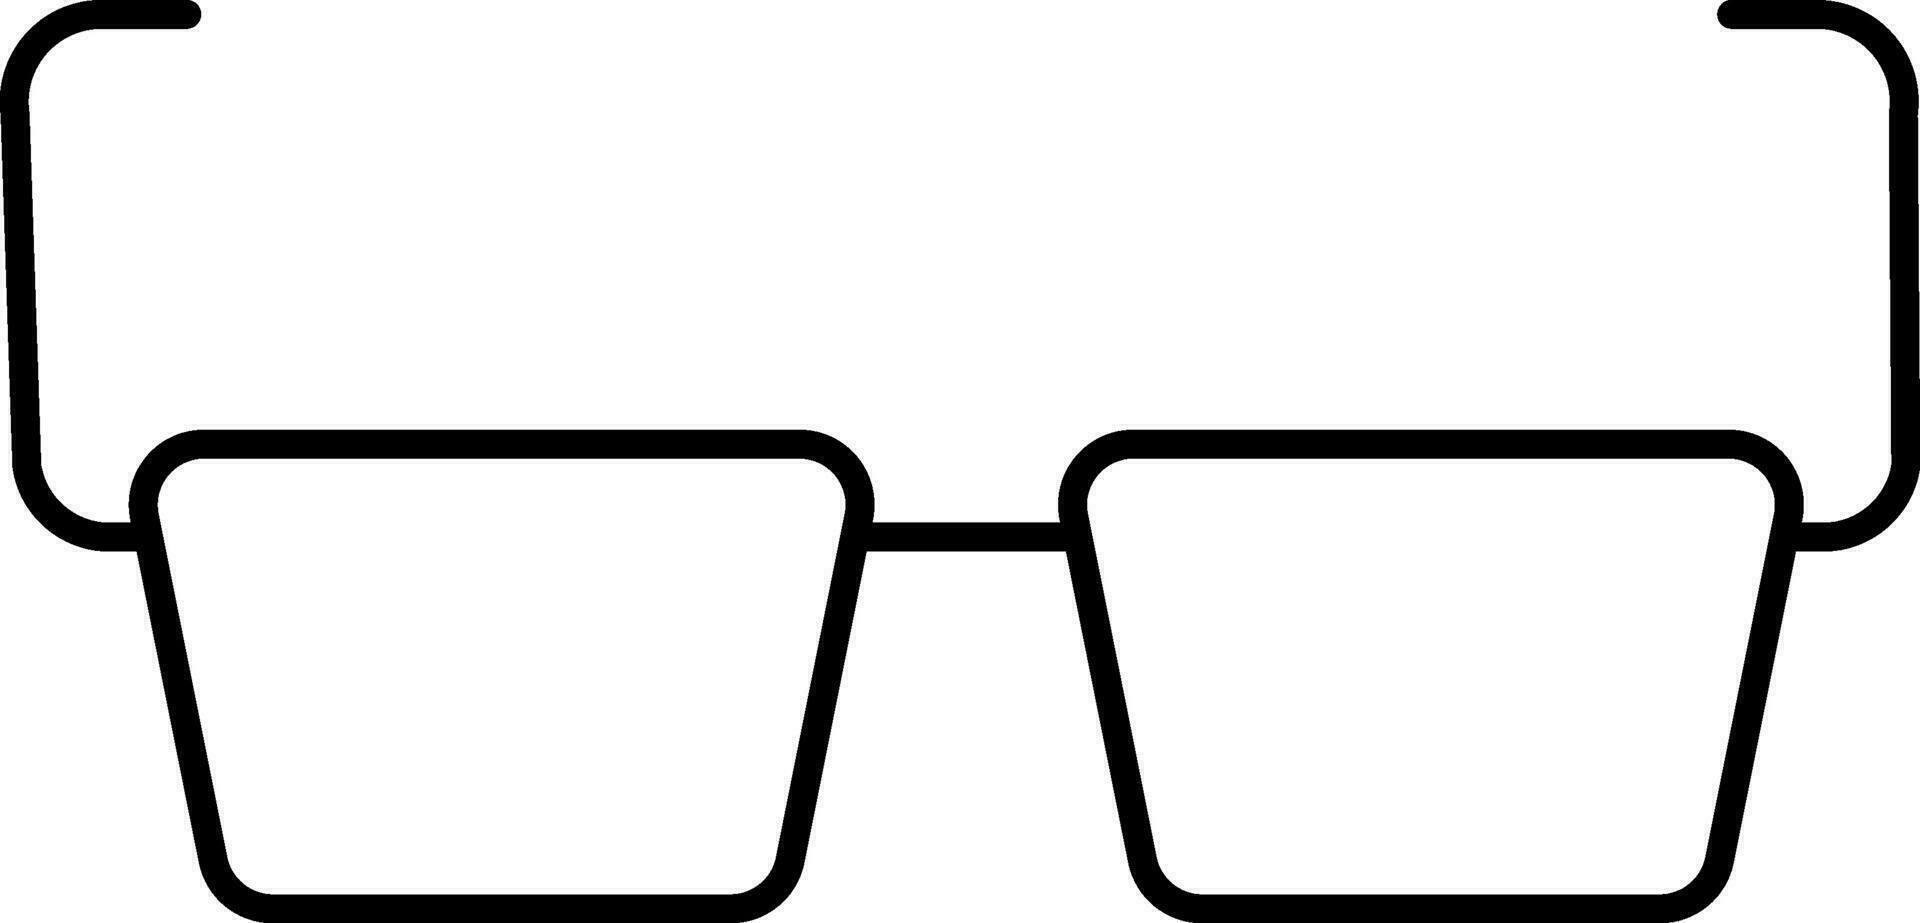 Black Outline Illustration of Goggles Icon. vector